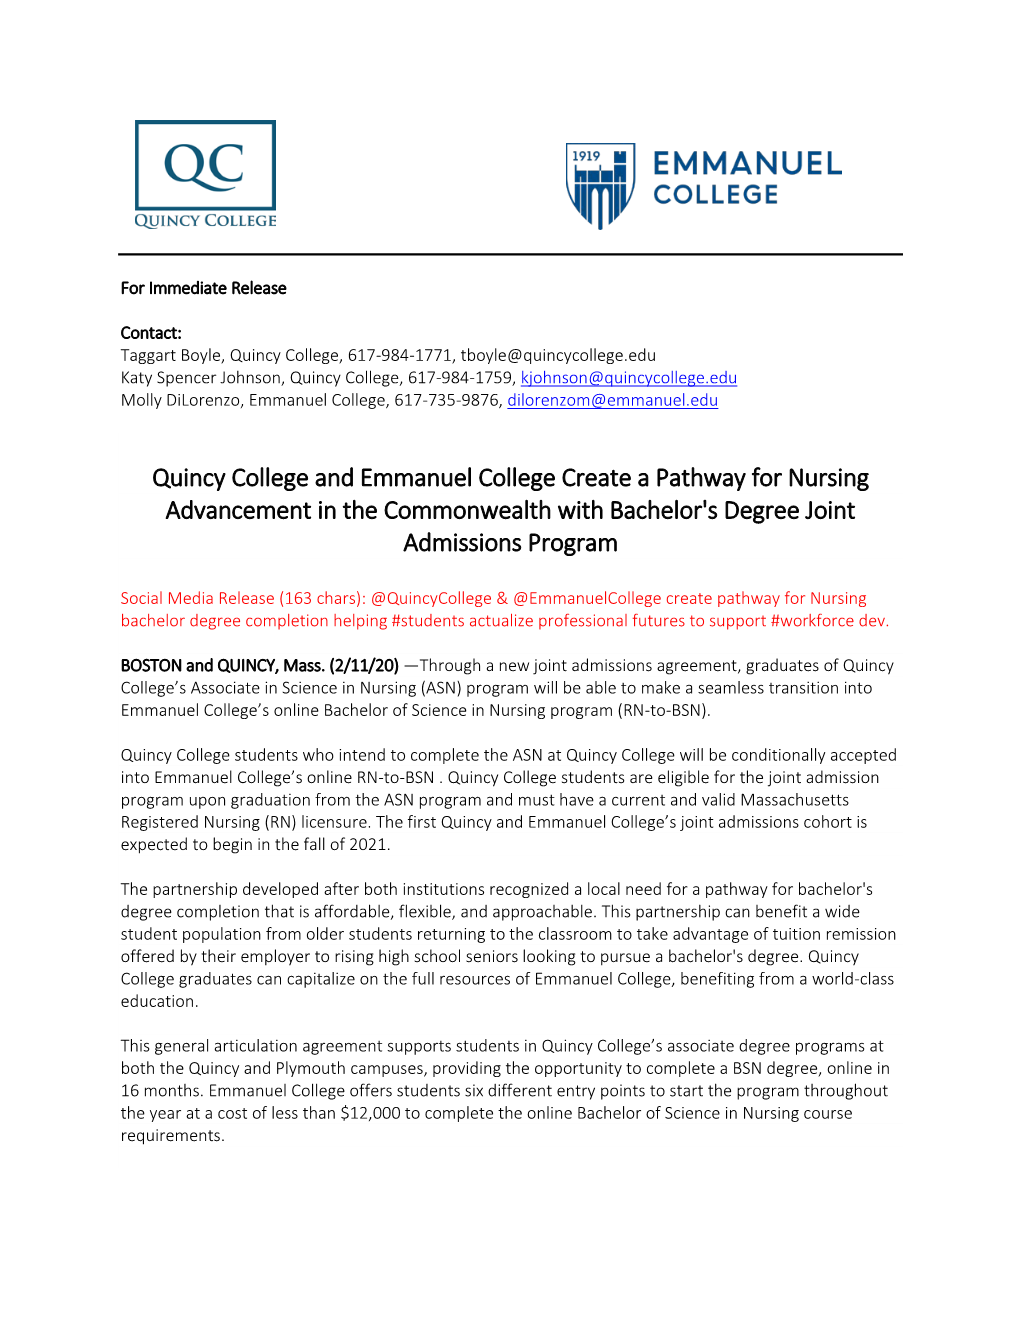 Quincy College and Emmanuel College Create a Pathway for Nursing Advancement in the Commonwealth with Bachelor's Degree Joint Admissions Program